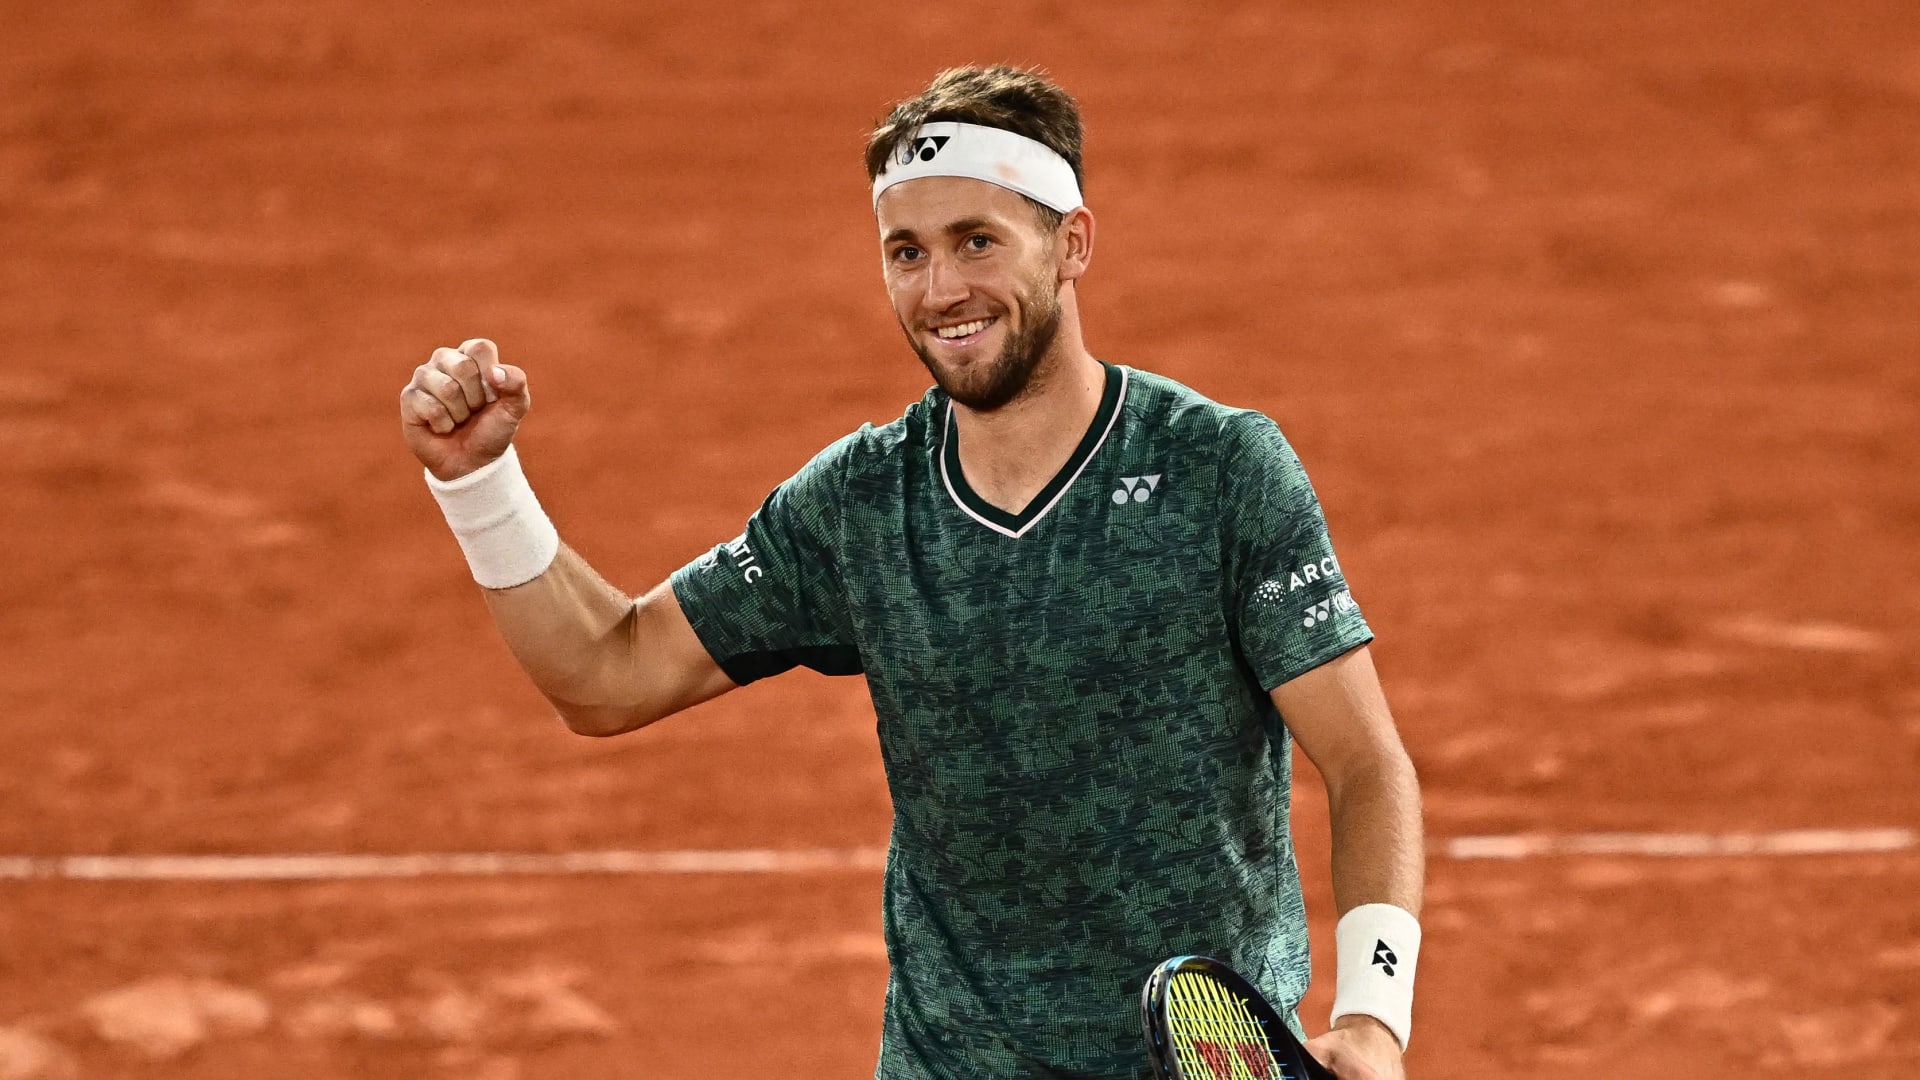 Casper Ruud beat Marin Cilic at Roland Garros by channeling the man hell play in his first major final Rafael Nadal